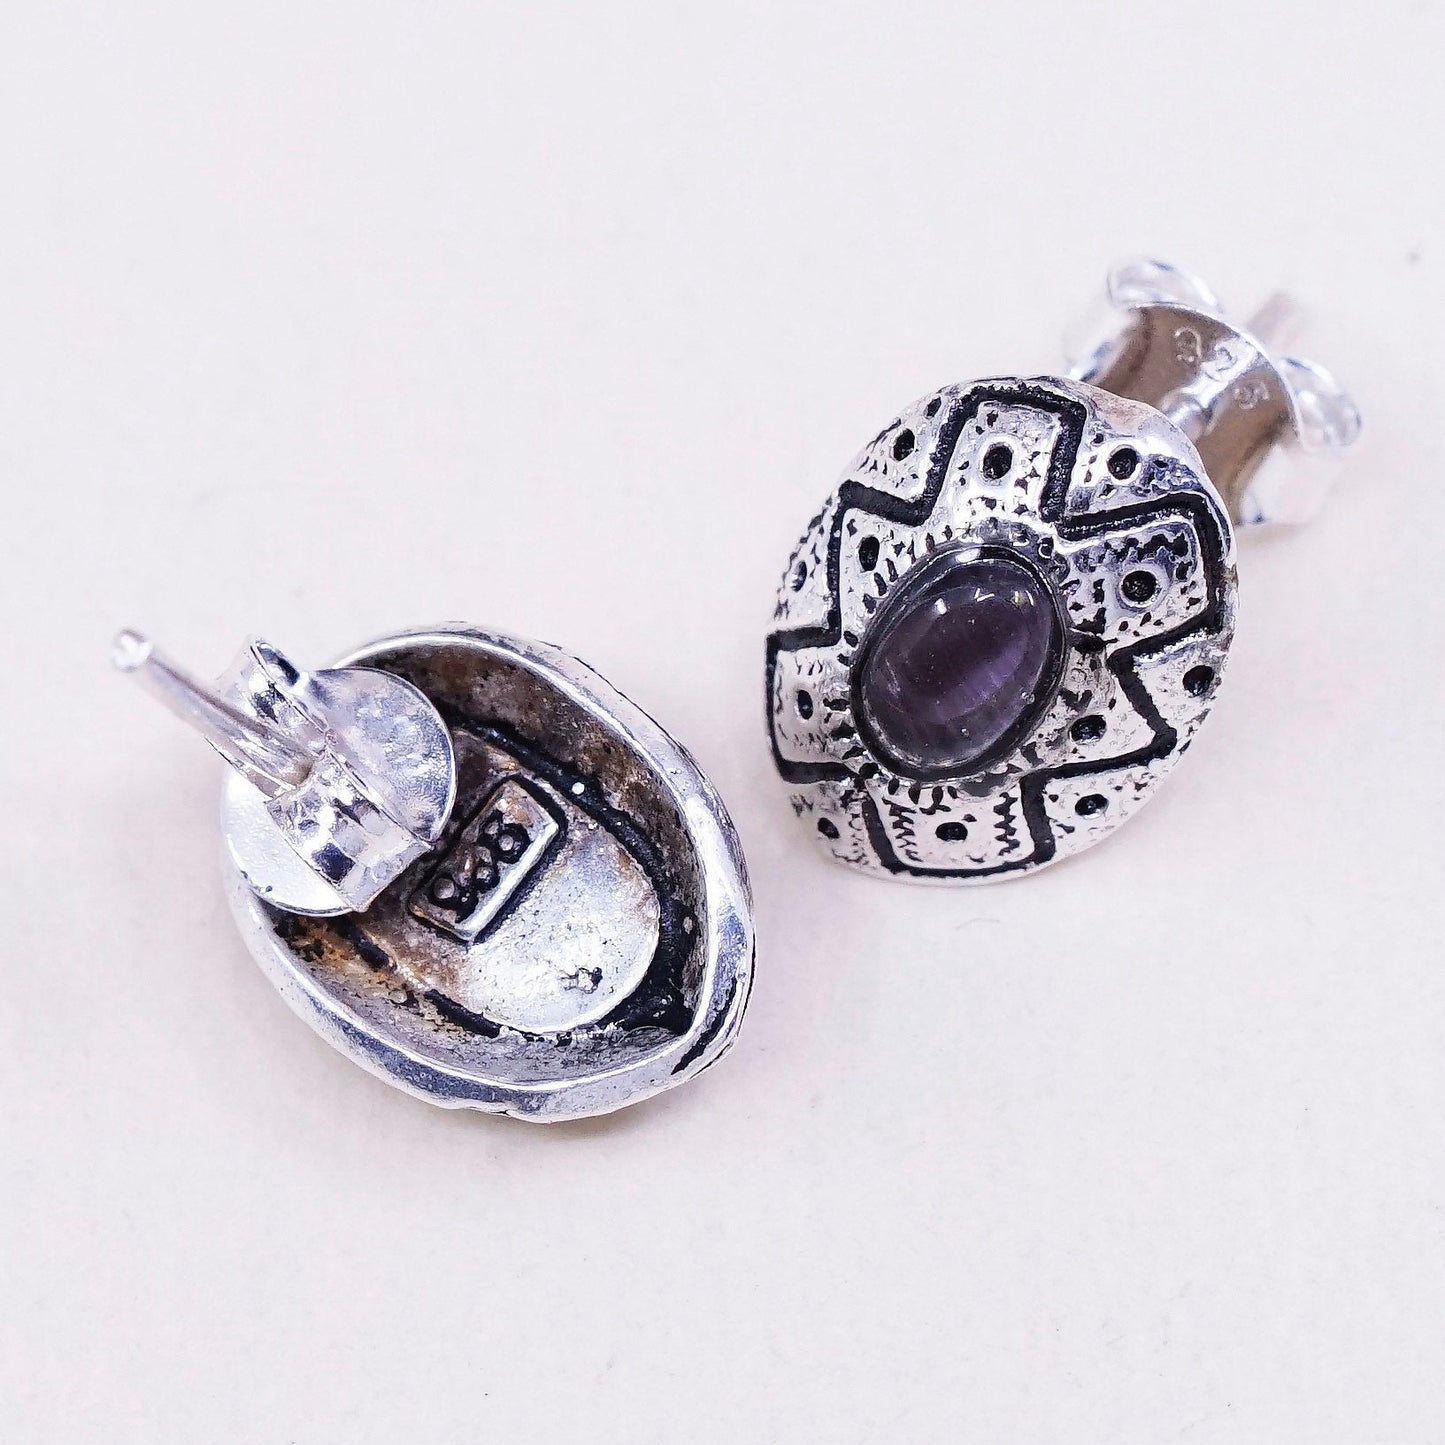 Vintage sterling silver earrings, 925 filigree studs with oval amethyst